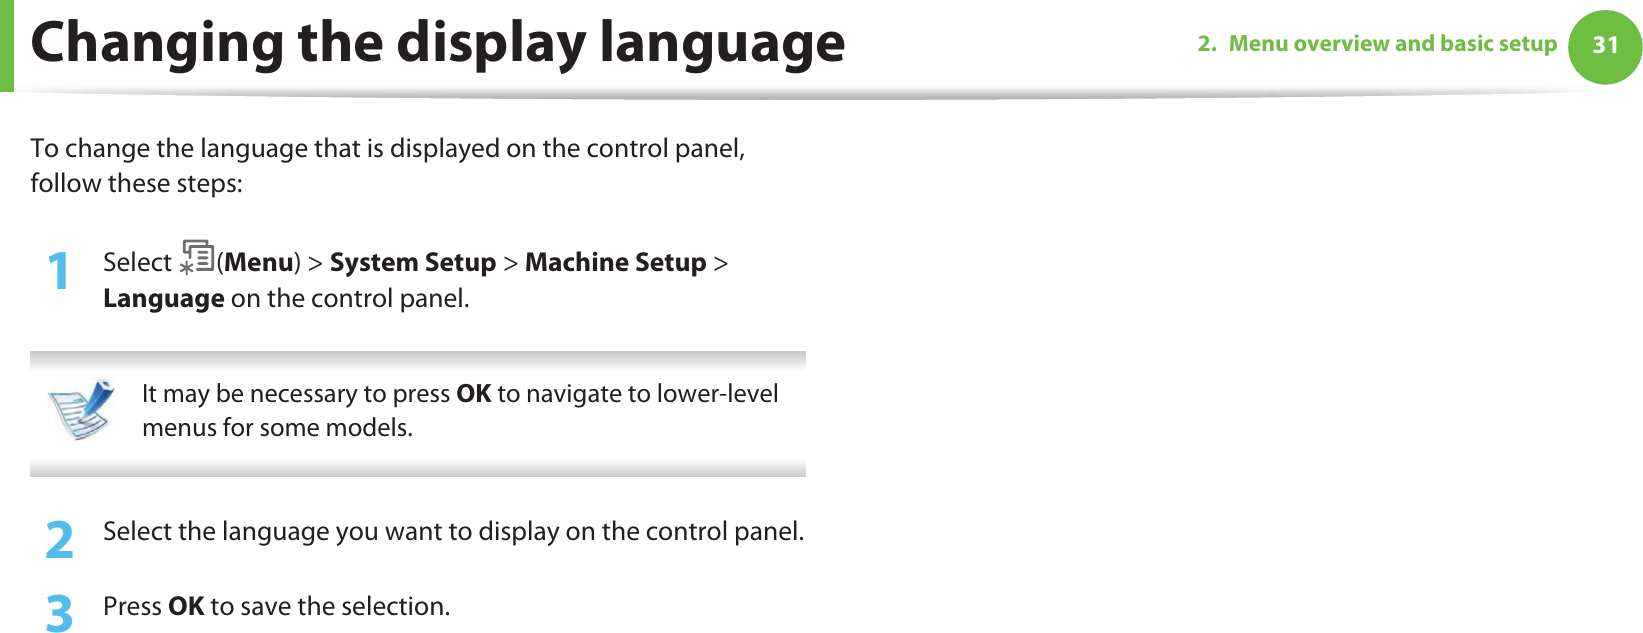 312. Menu overview and basic setupChanging the display languageTo change the language that is displayed on the control panel, follow these steps:1Select (Menu) &gt; System Setup &gt; Machine Setup &gt; Language on the control panel. It may be necessary to press OK to navigate to lower-level menus for some models. 2  Select the language you want to display on the control panel.3  Press OK to save the selection.